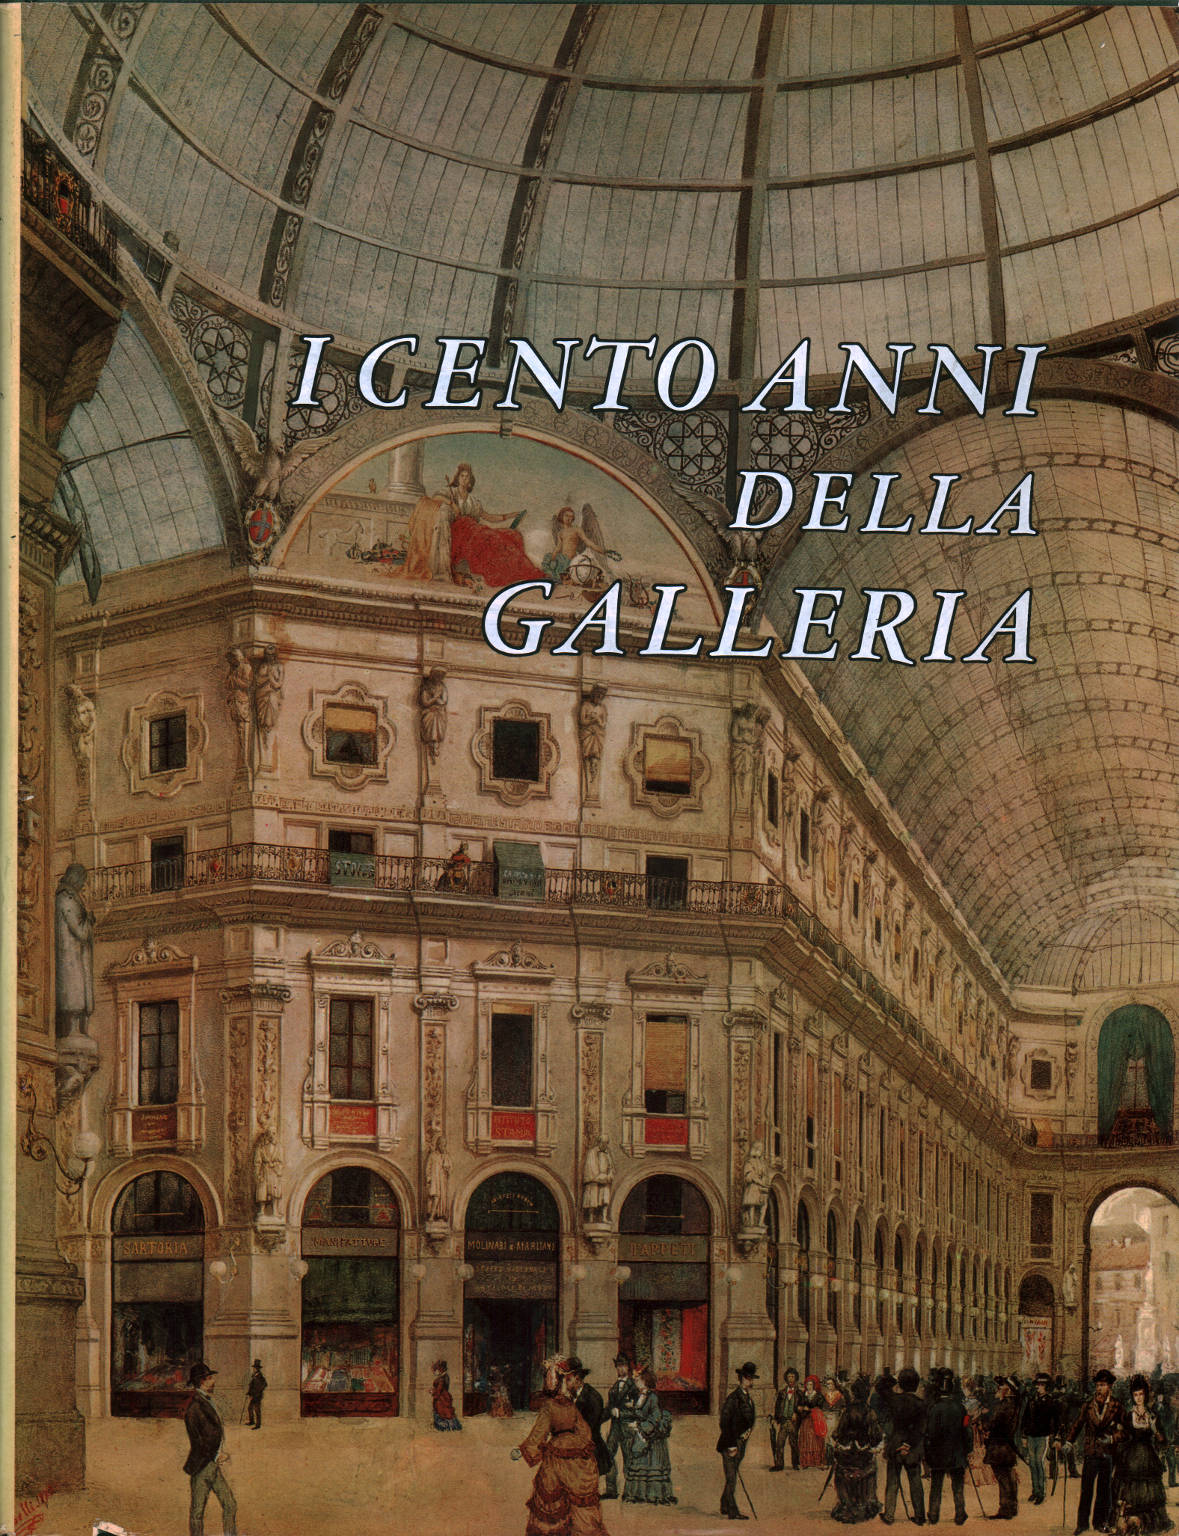 The hundred years of the Gallery, Giorgio Mascherpa